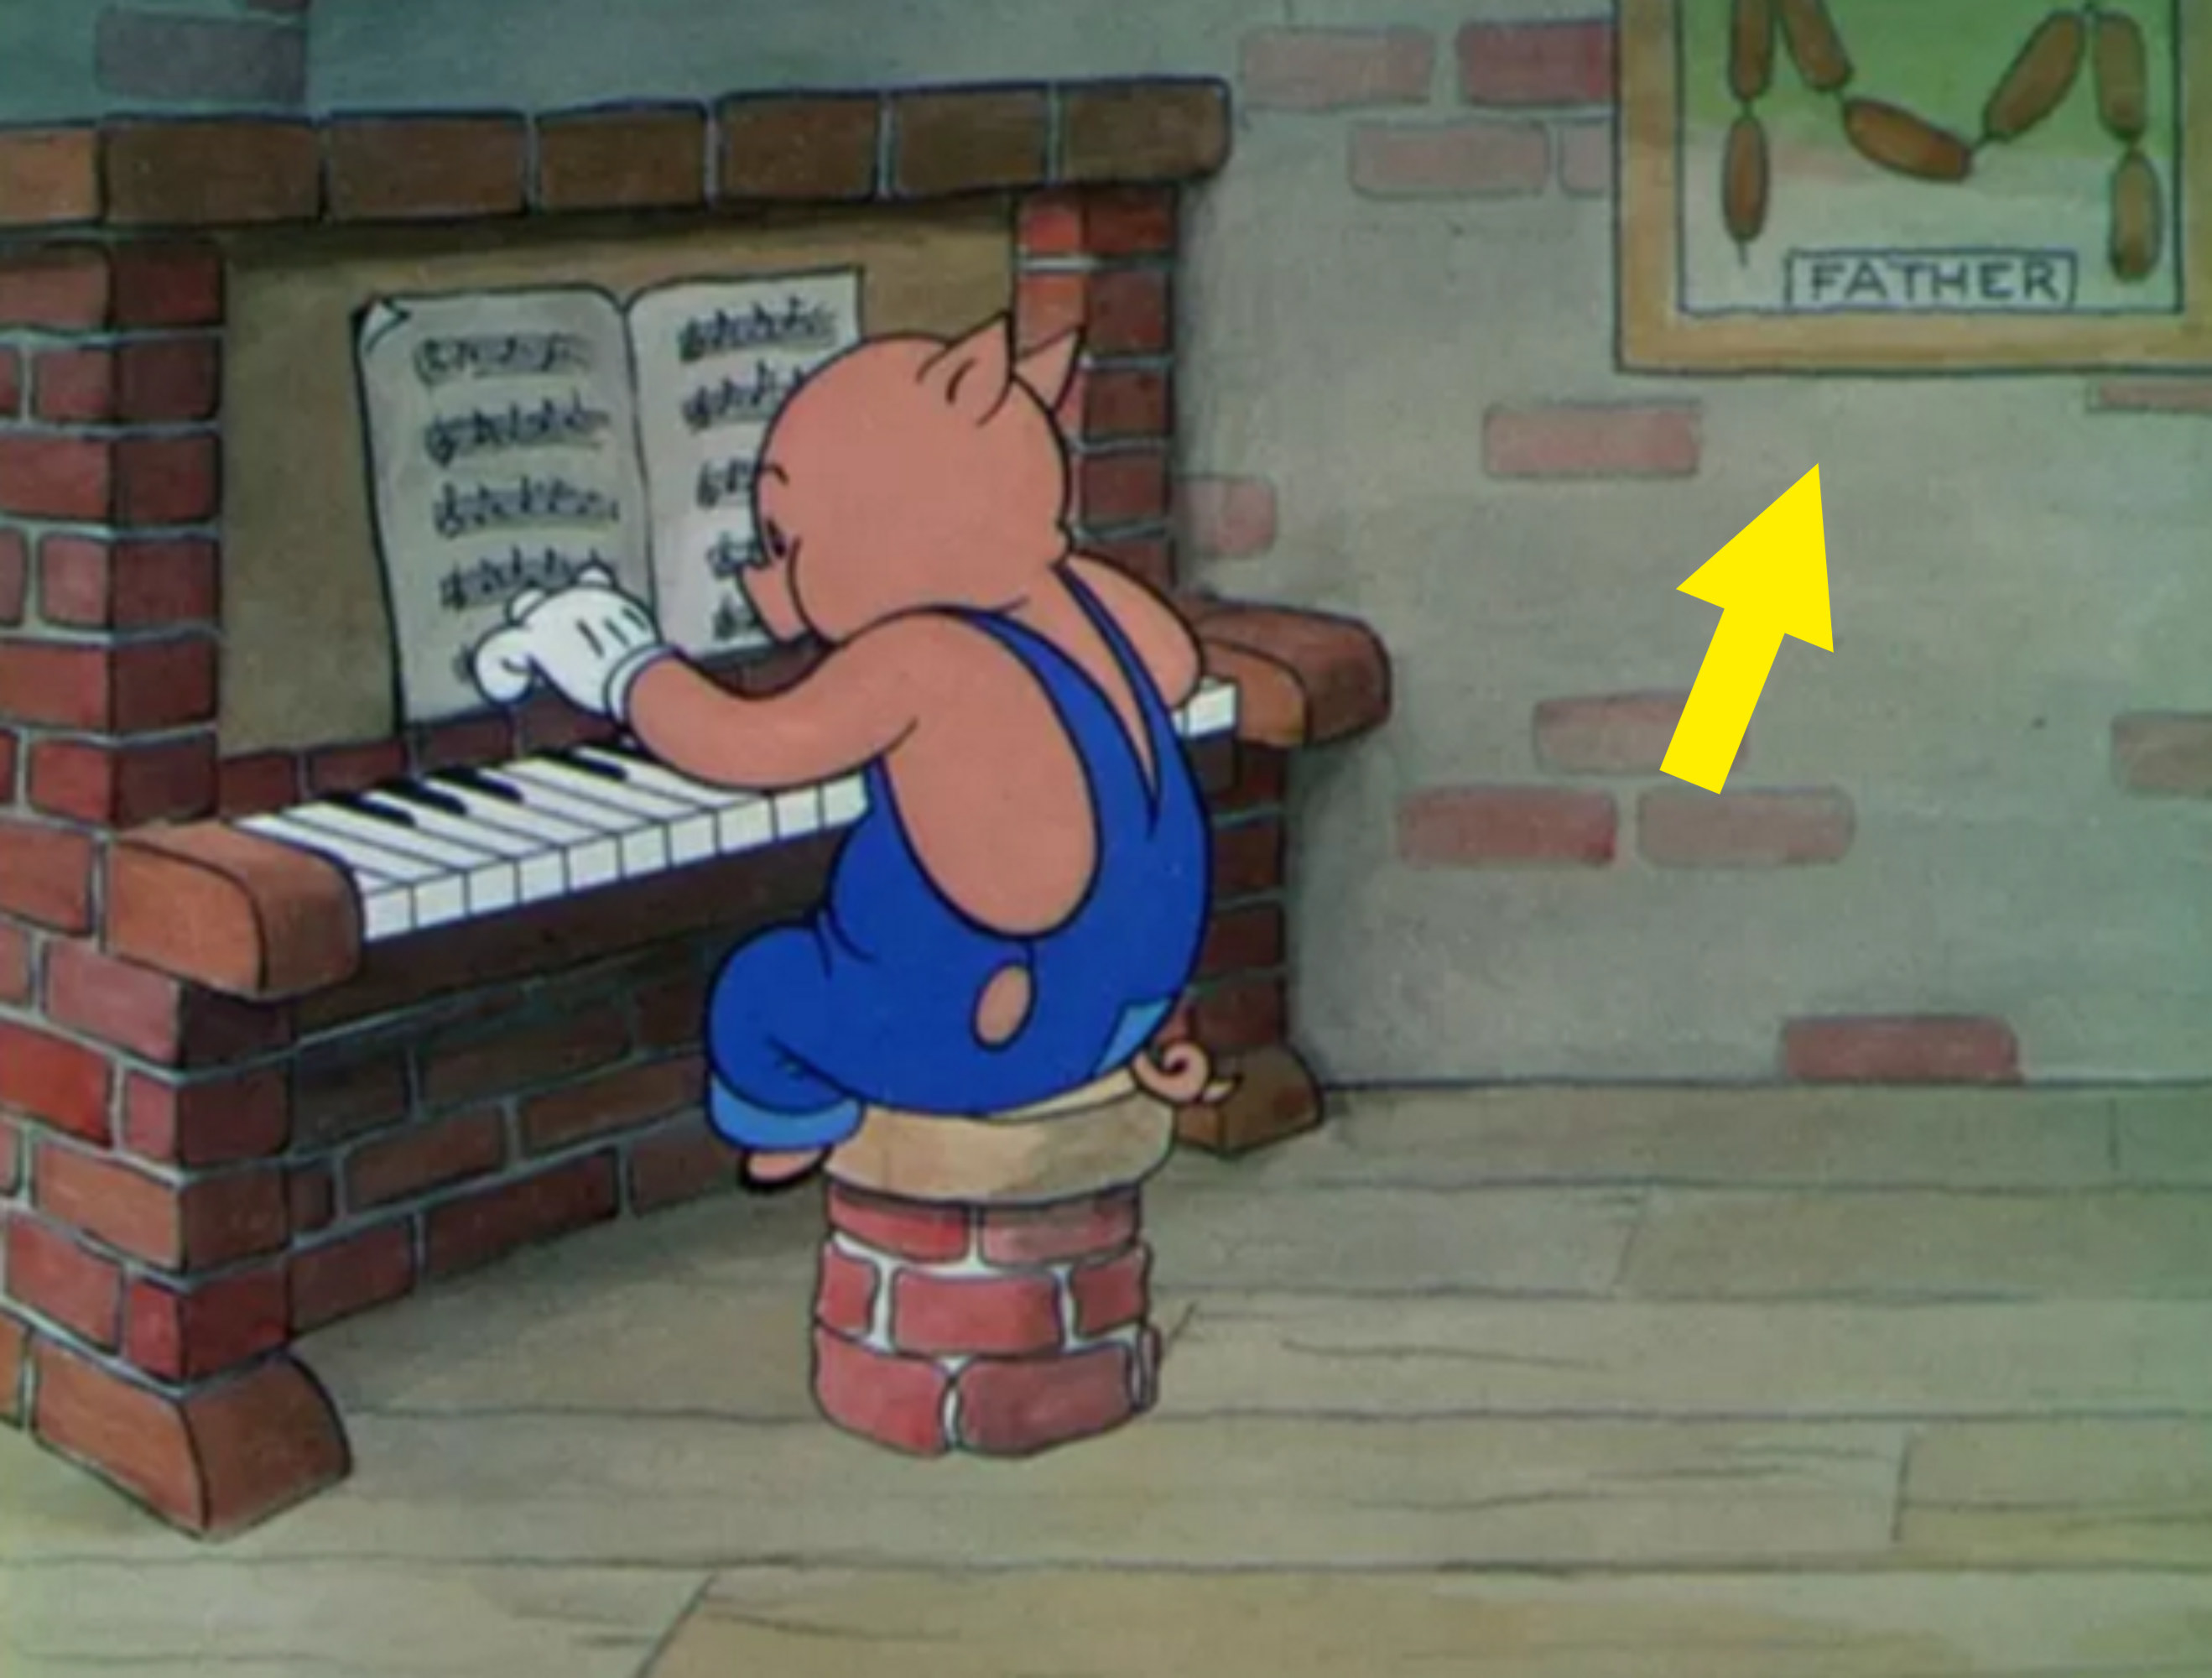 A pig plays the piano and in the background, a photograph of sausages labeled &quot;father&quot; hangs on the wall